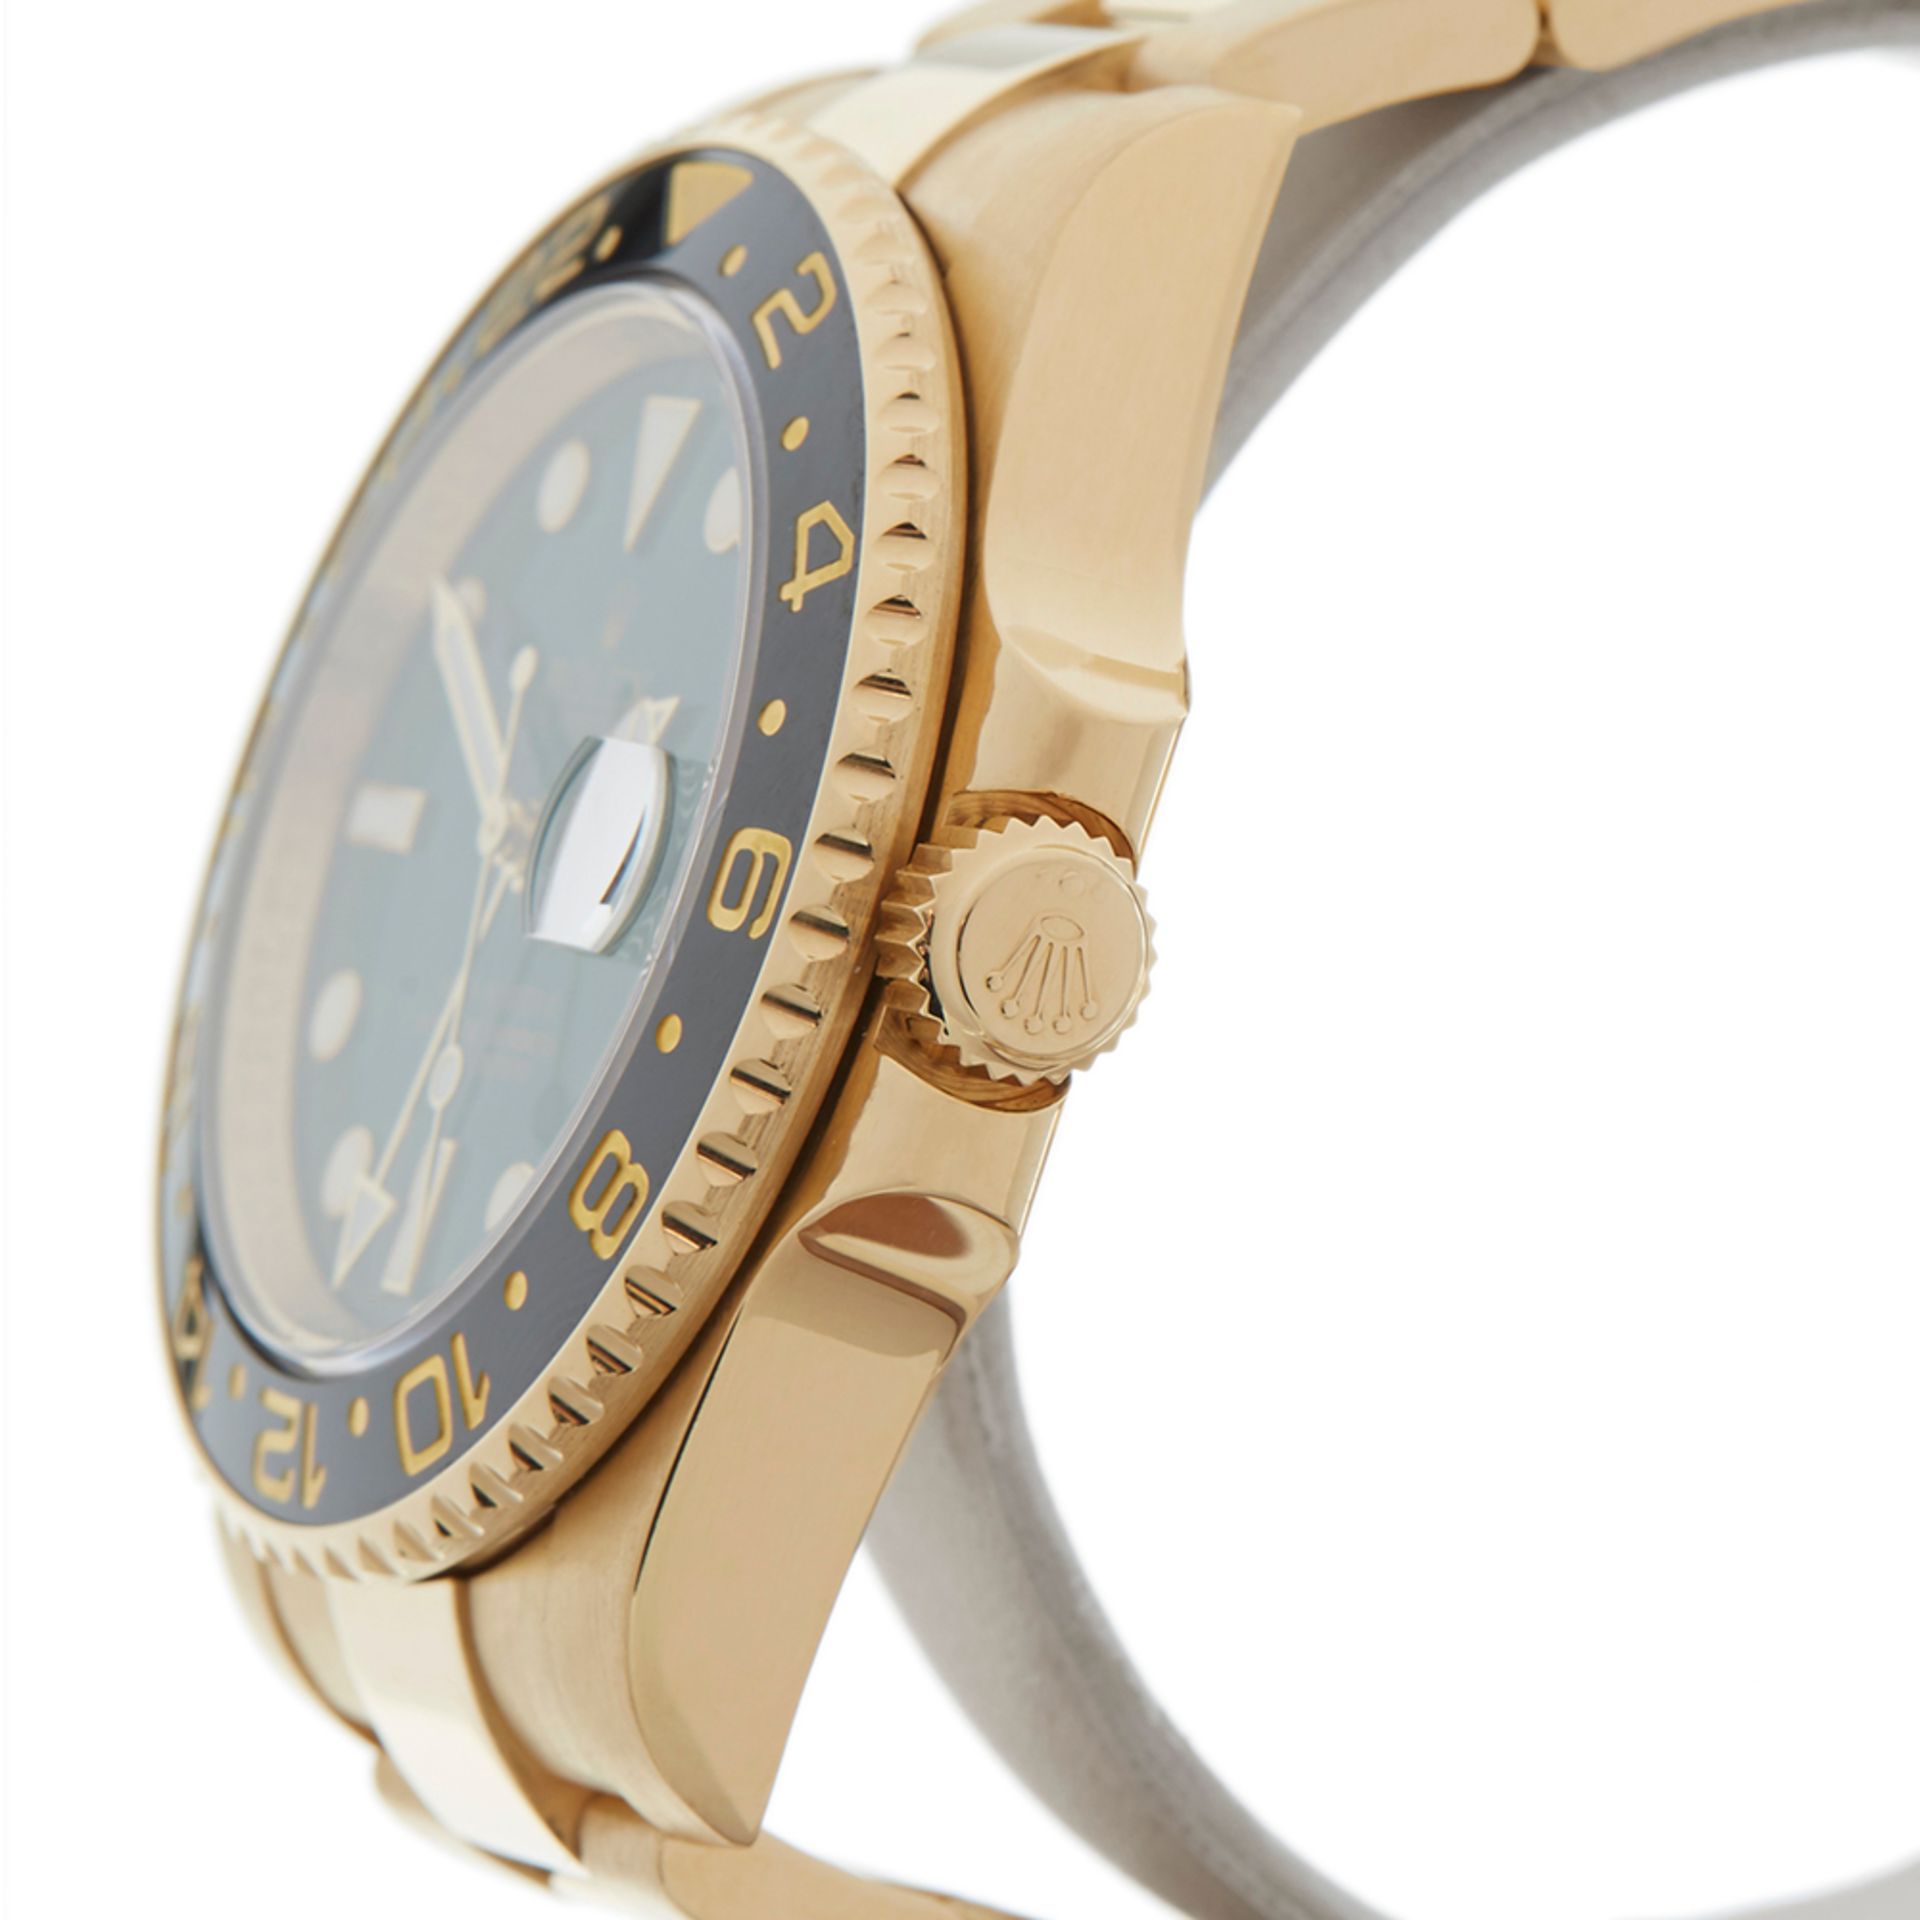 GMT-Master II 40mm 18K Yellow Gold - 116718 - Image 4 of 9